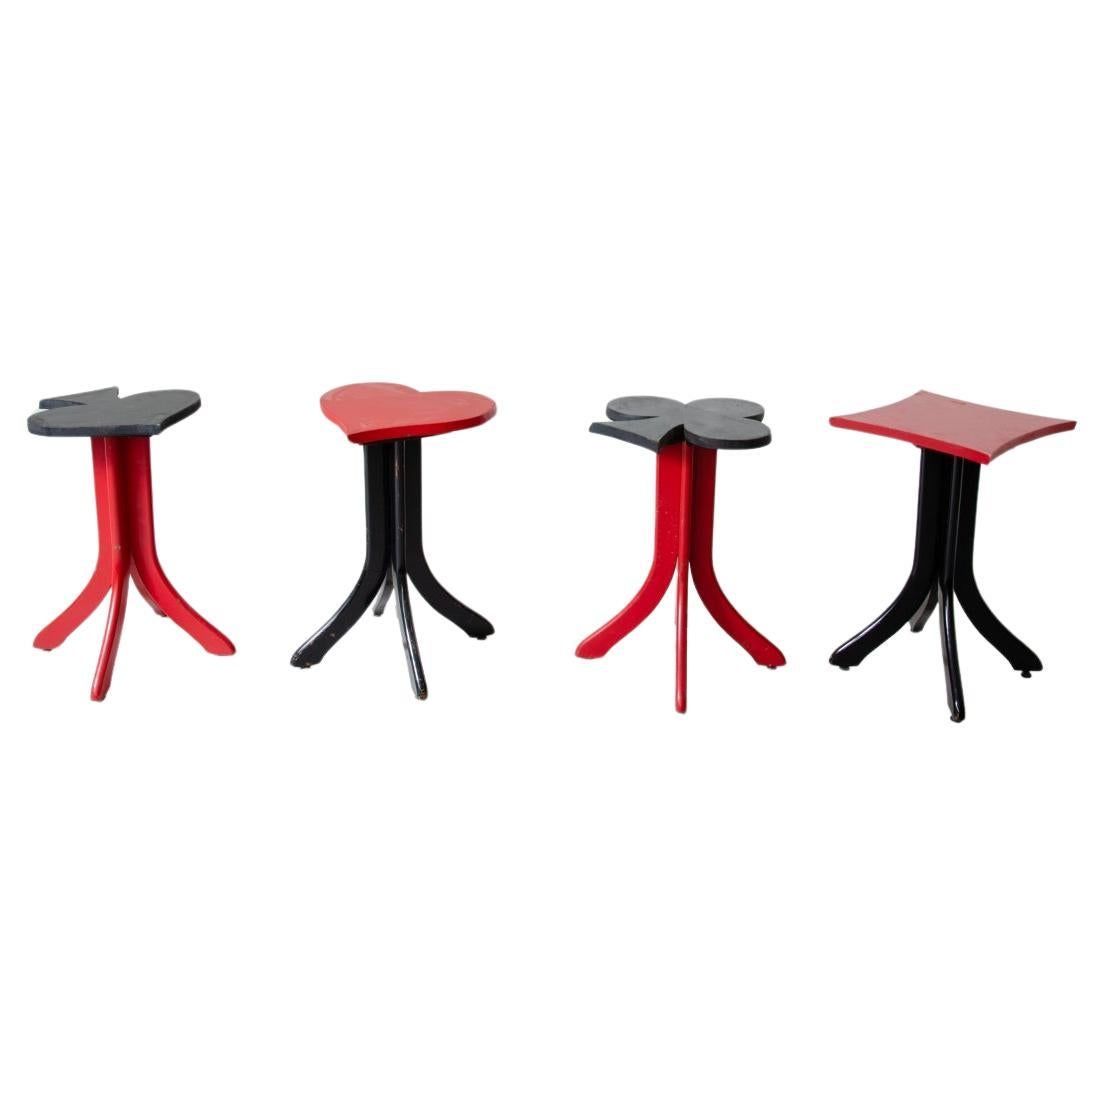 Set of 4 bar stools in two colors lacquered wood